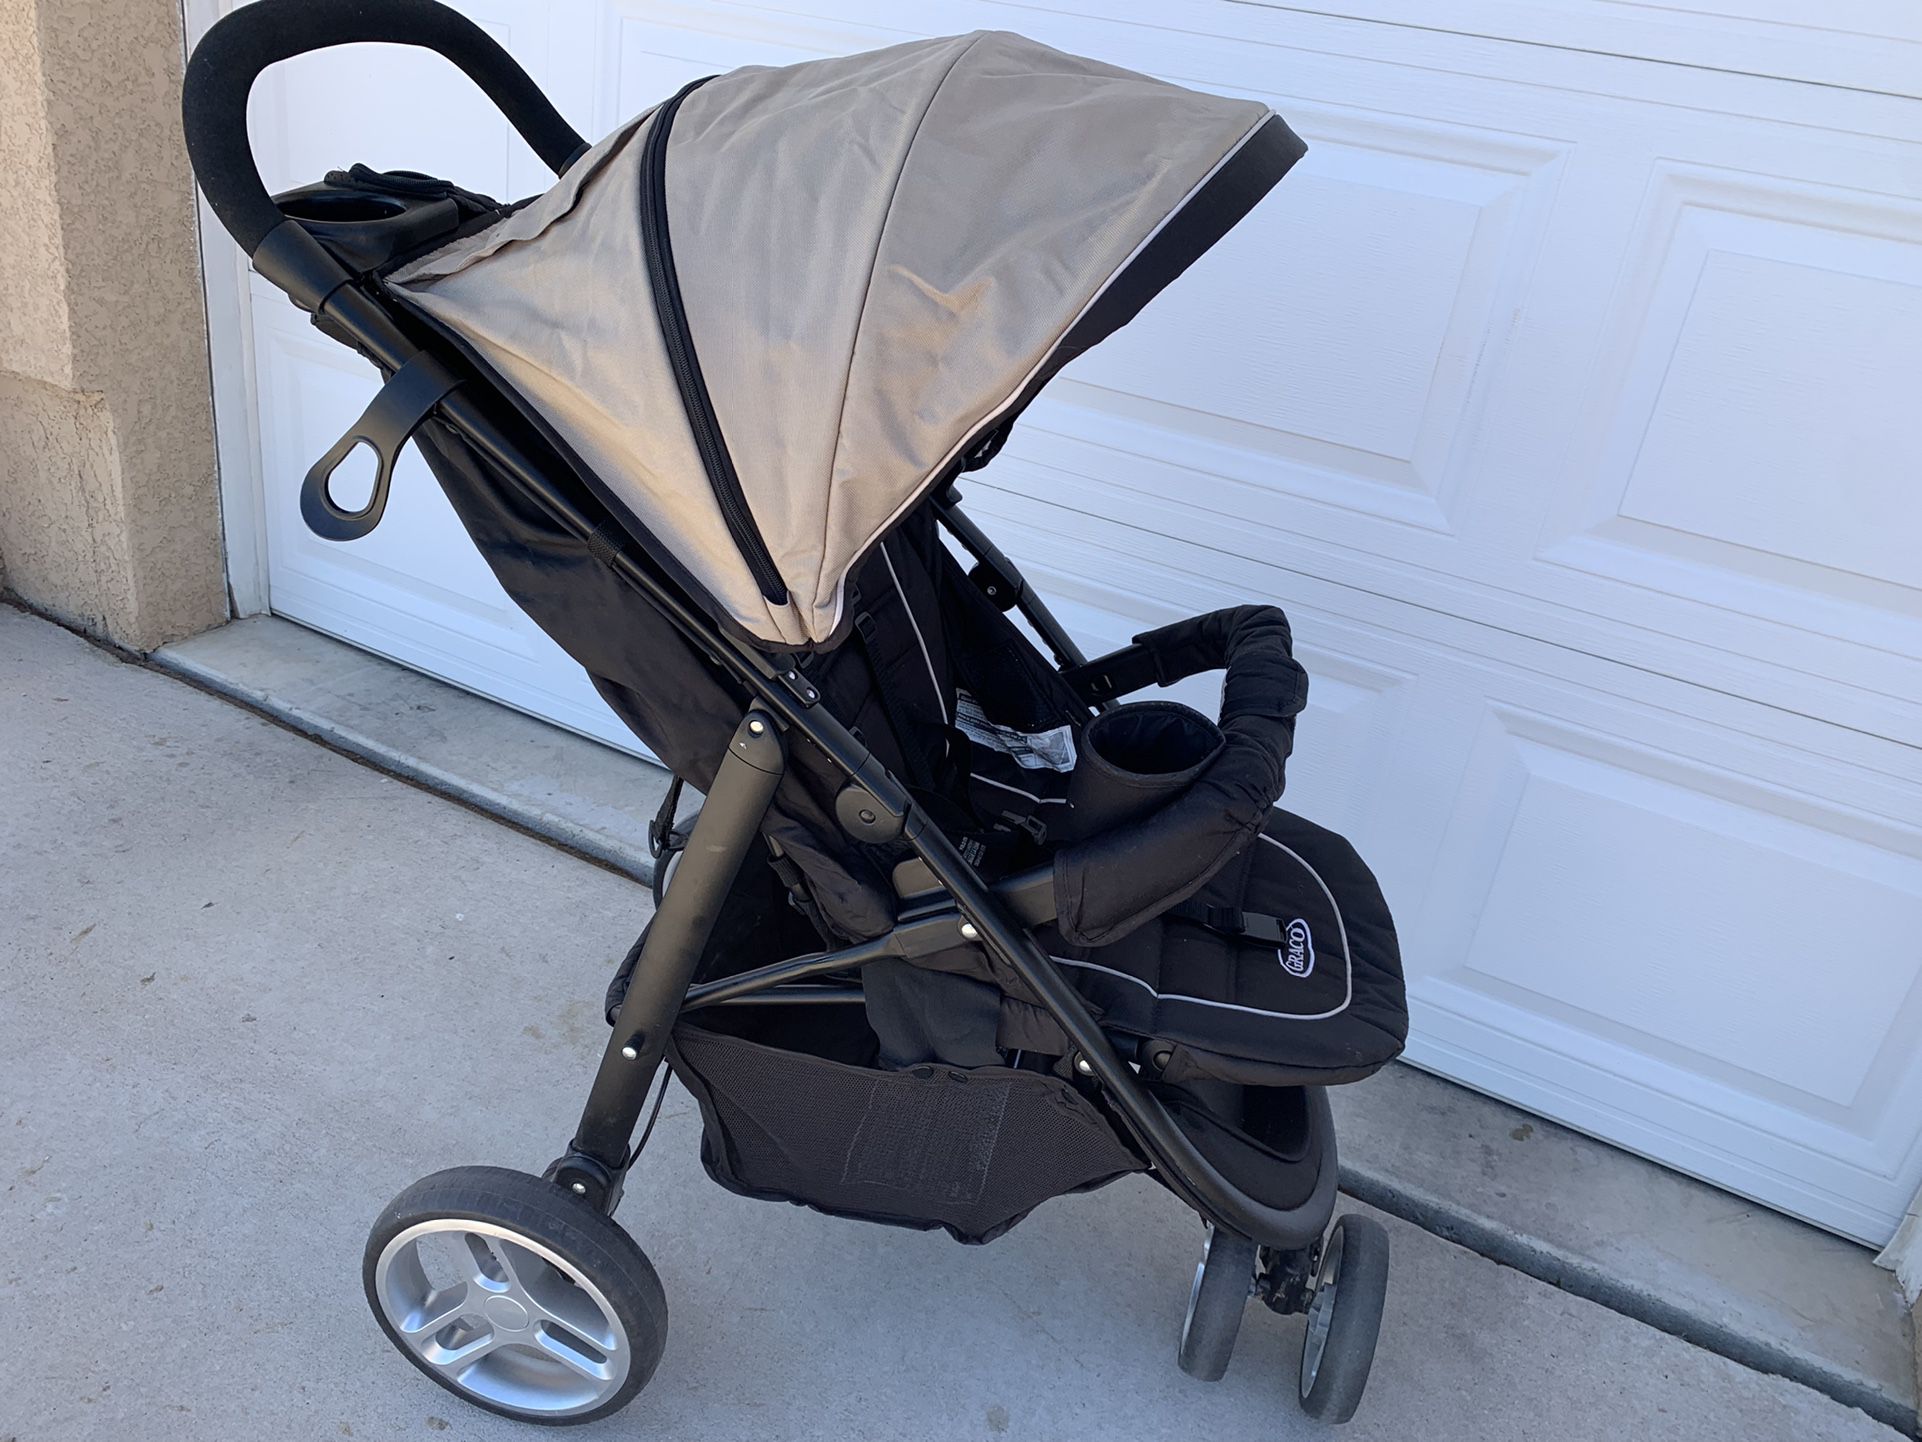 Graco travel system stroller and car seat with base